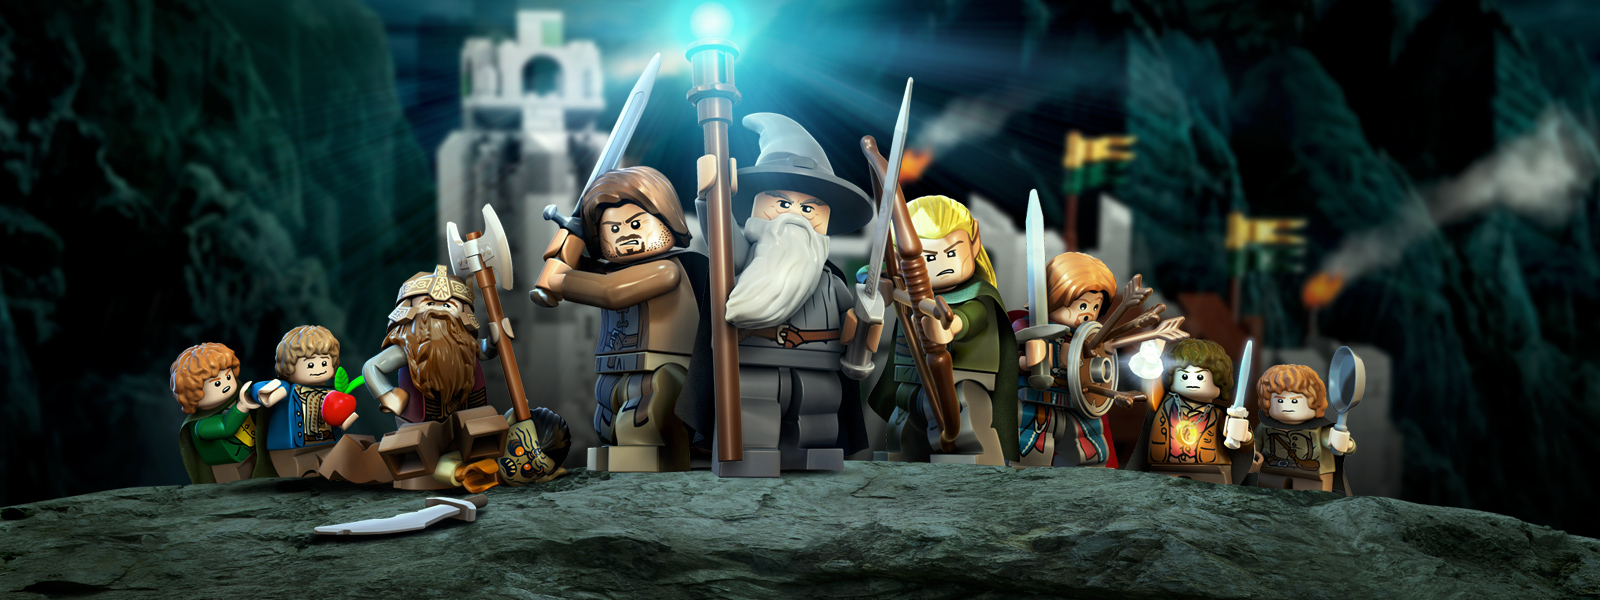 lego lord of the rings metacritic